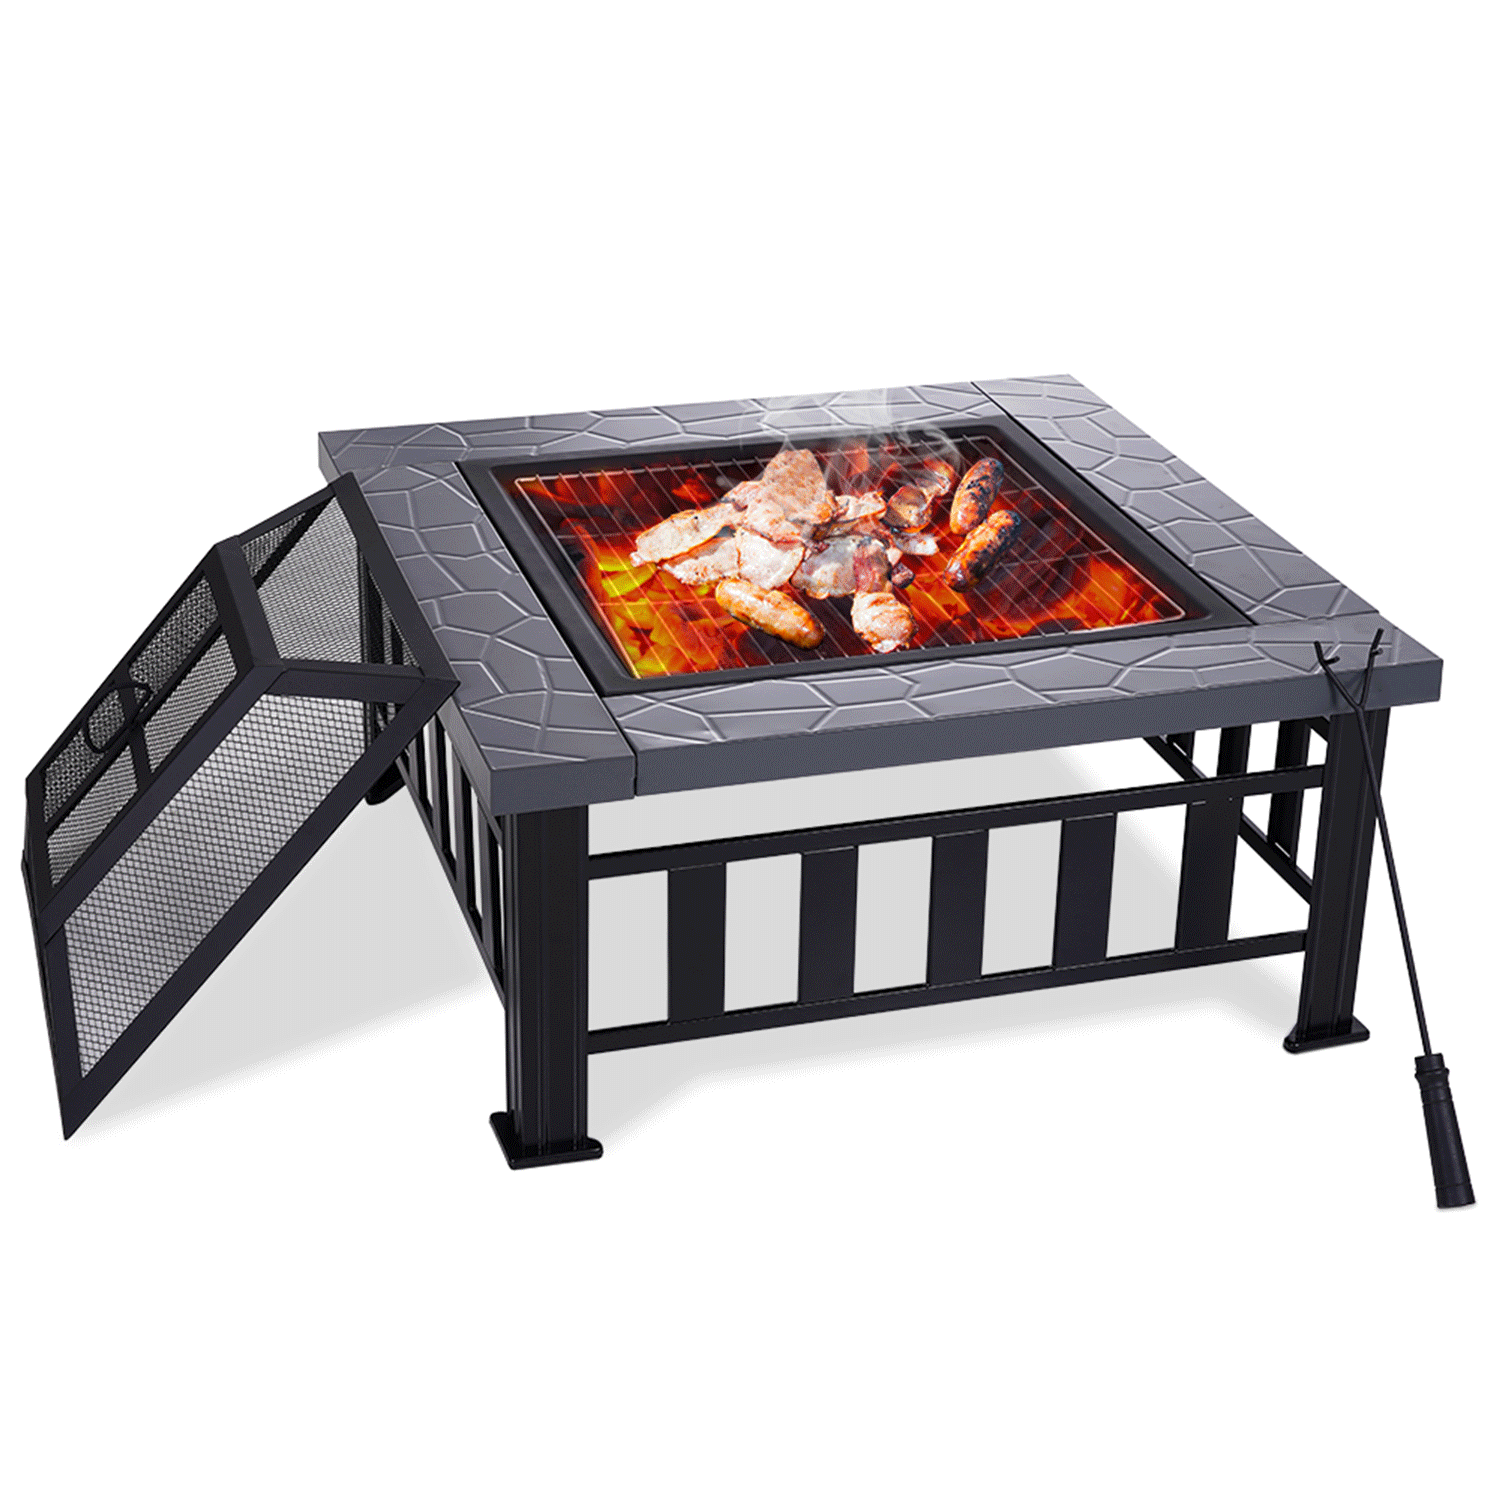 Bbq Square Wood Burning Firepit Table, Char Broil Outdoor Fire Pit